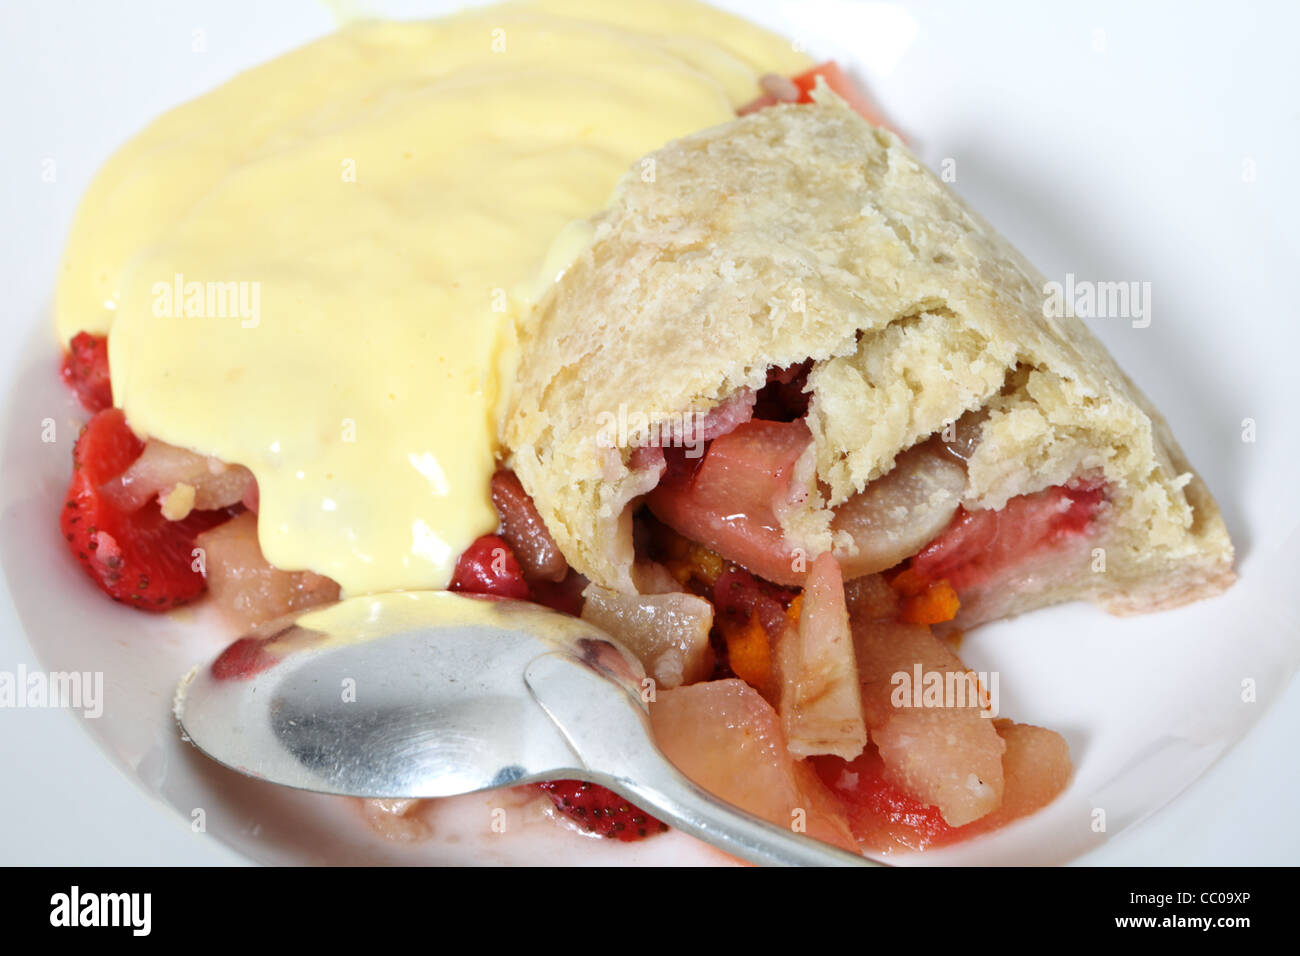 British steamed fruit pudding, of pears and strawberries with a sweet suet pastry crust, custard and an old-fashioned spoon Stock Photo